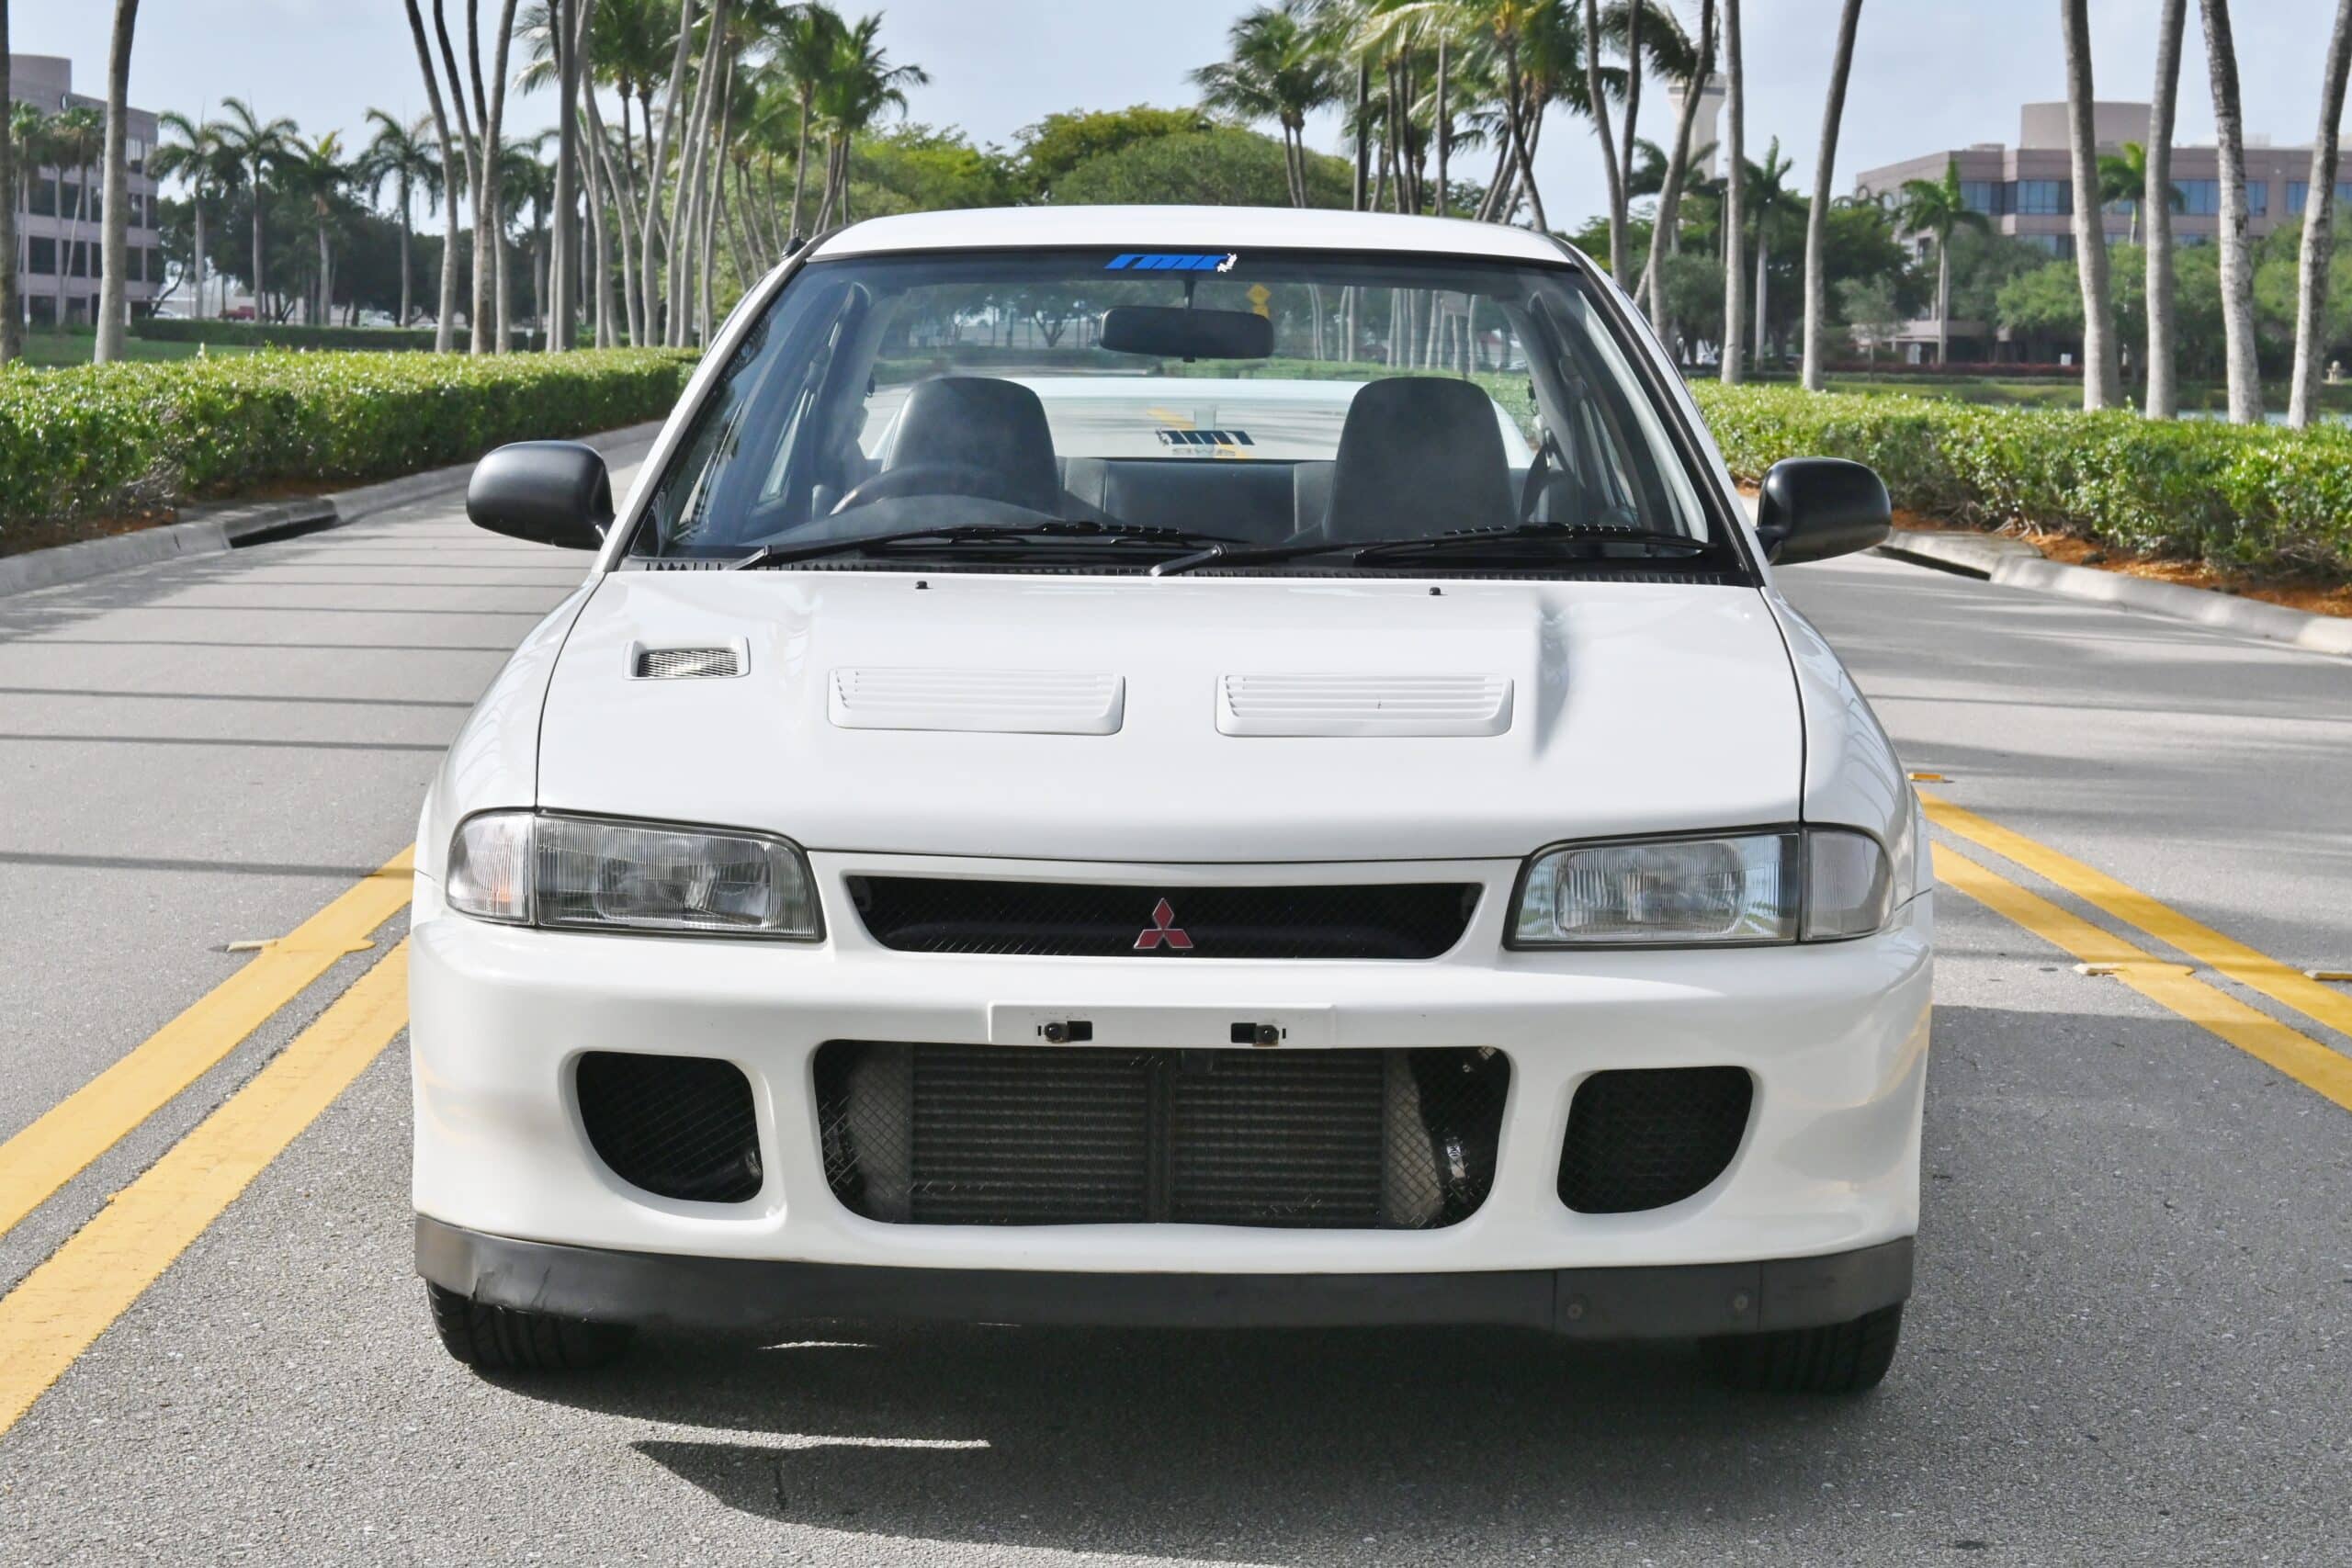 1994 Mitsubishi Evolution 2 RS Lightweight Rally Spec – OZ racing wheels – JDM – Ice Cold AC- Timing Belt Done